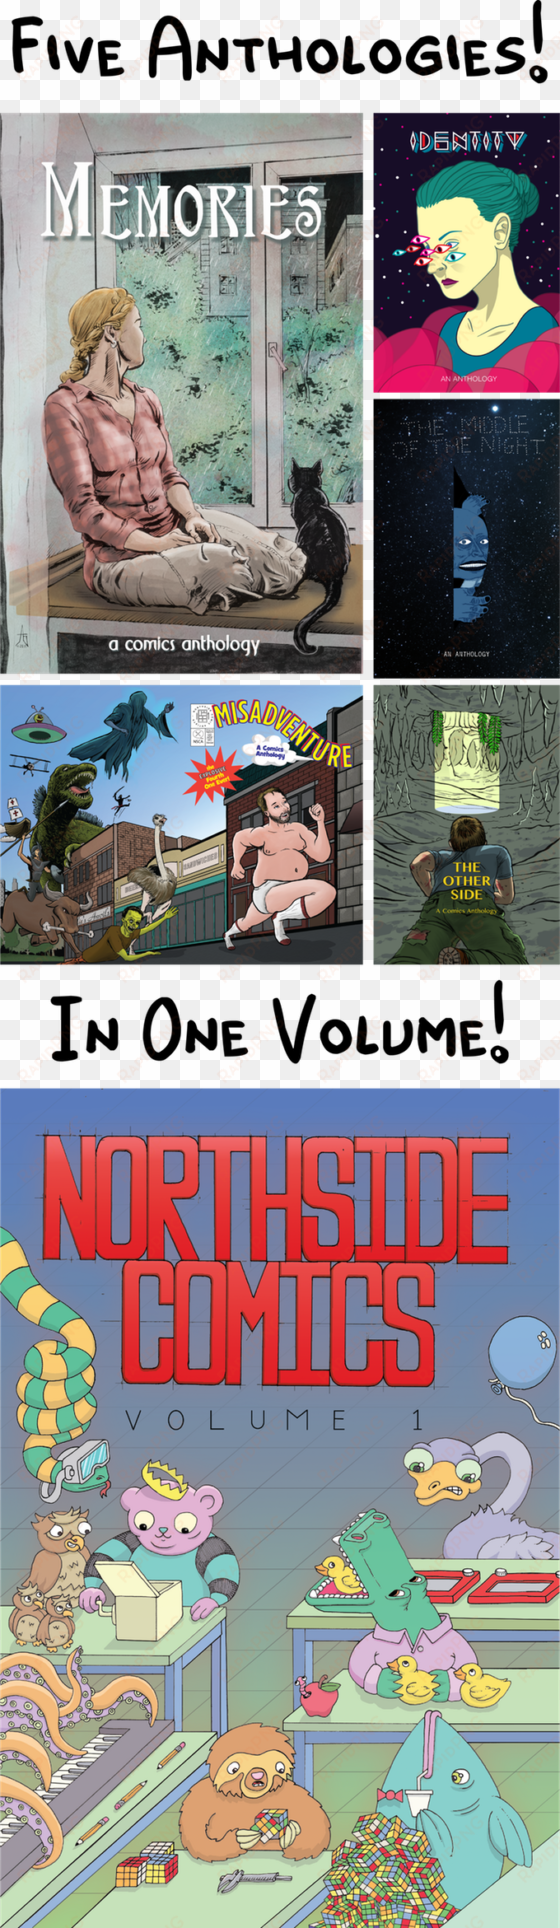 anthologies included in volume 1 from northside comics - comics